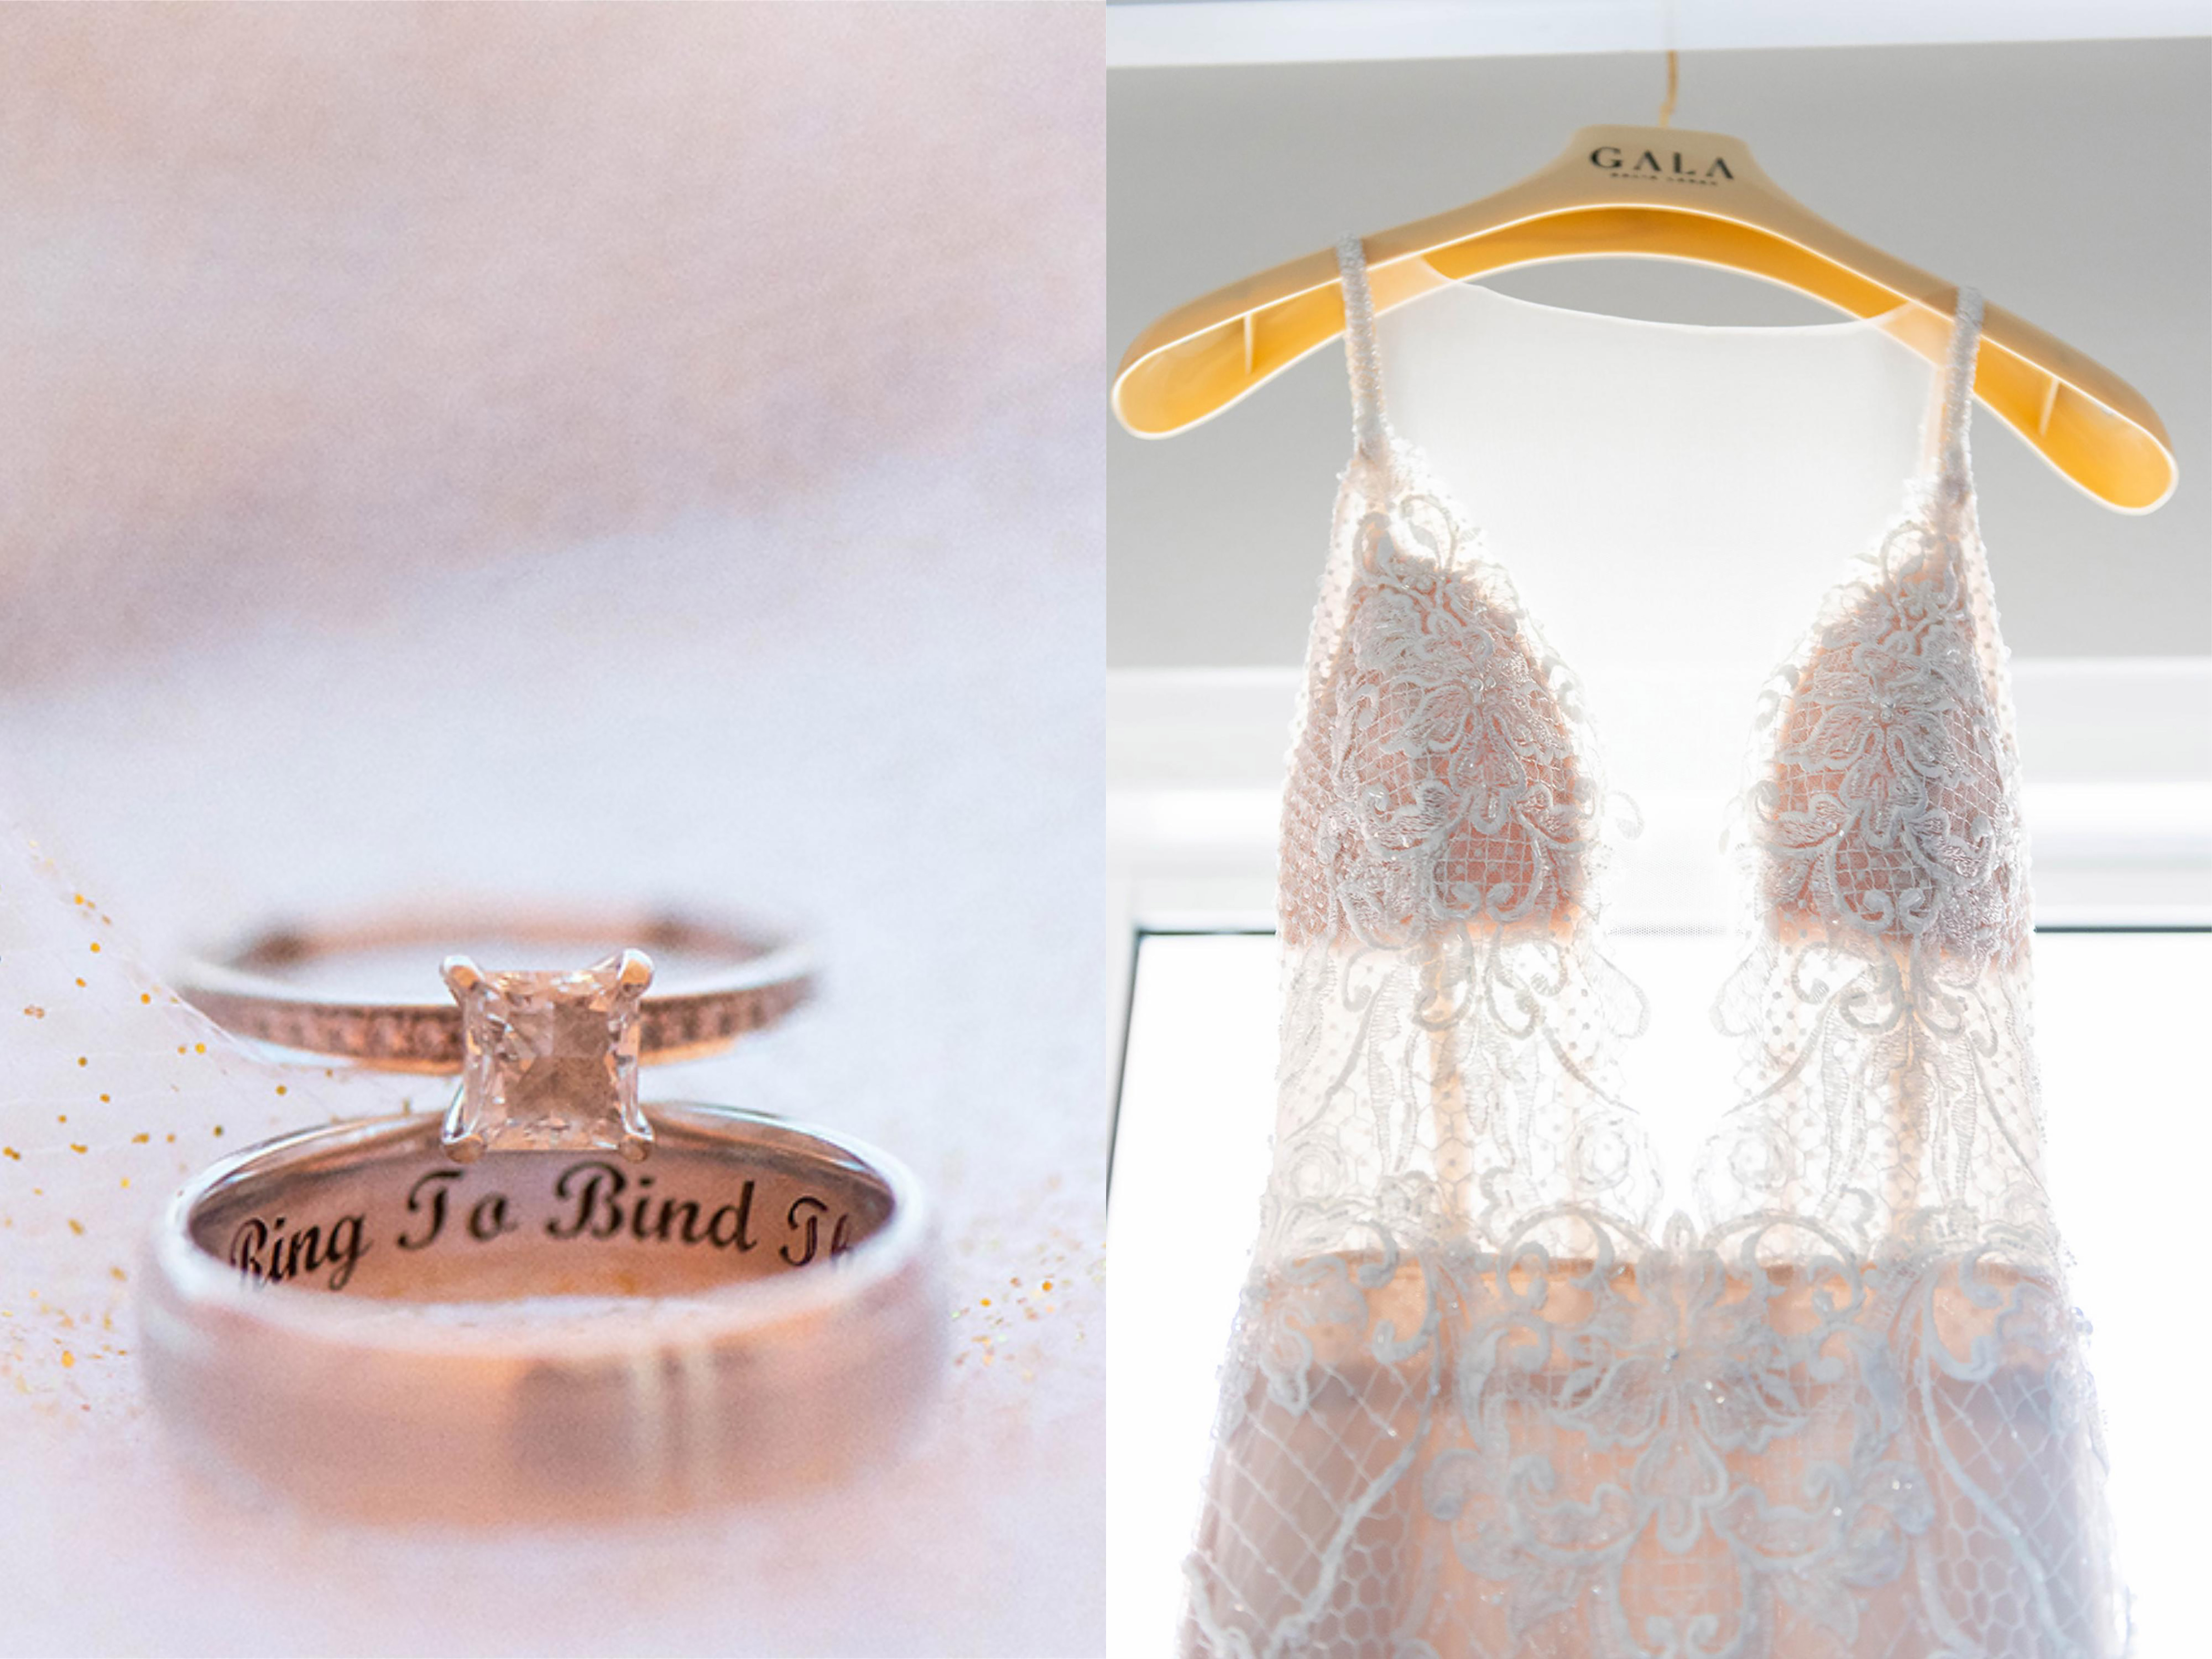 Hyatt Regency Clearwater Beach Wedding Galia Lahav GALA collection wedding dress wedding rings with lord of the rings quote in lace detail shots